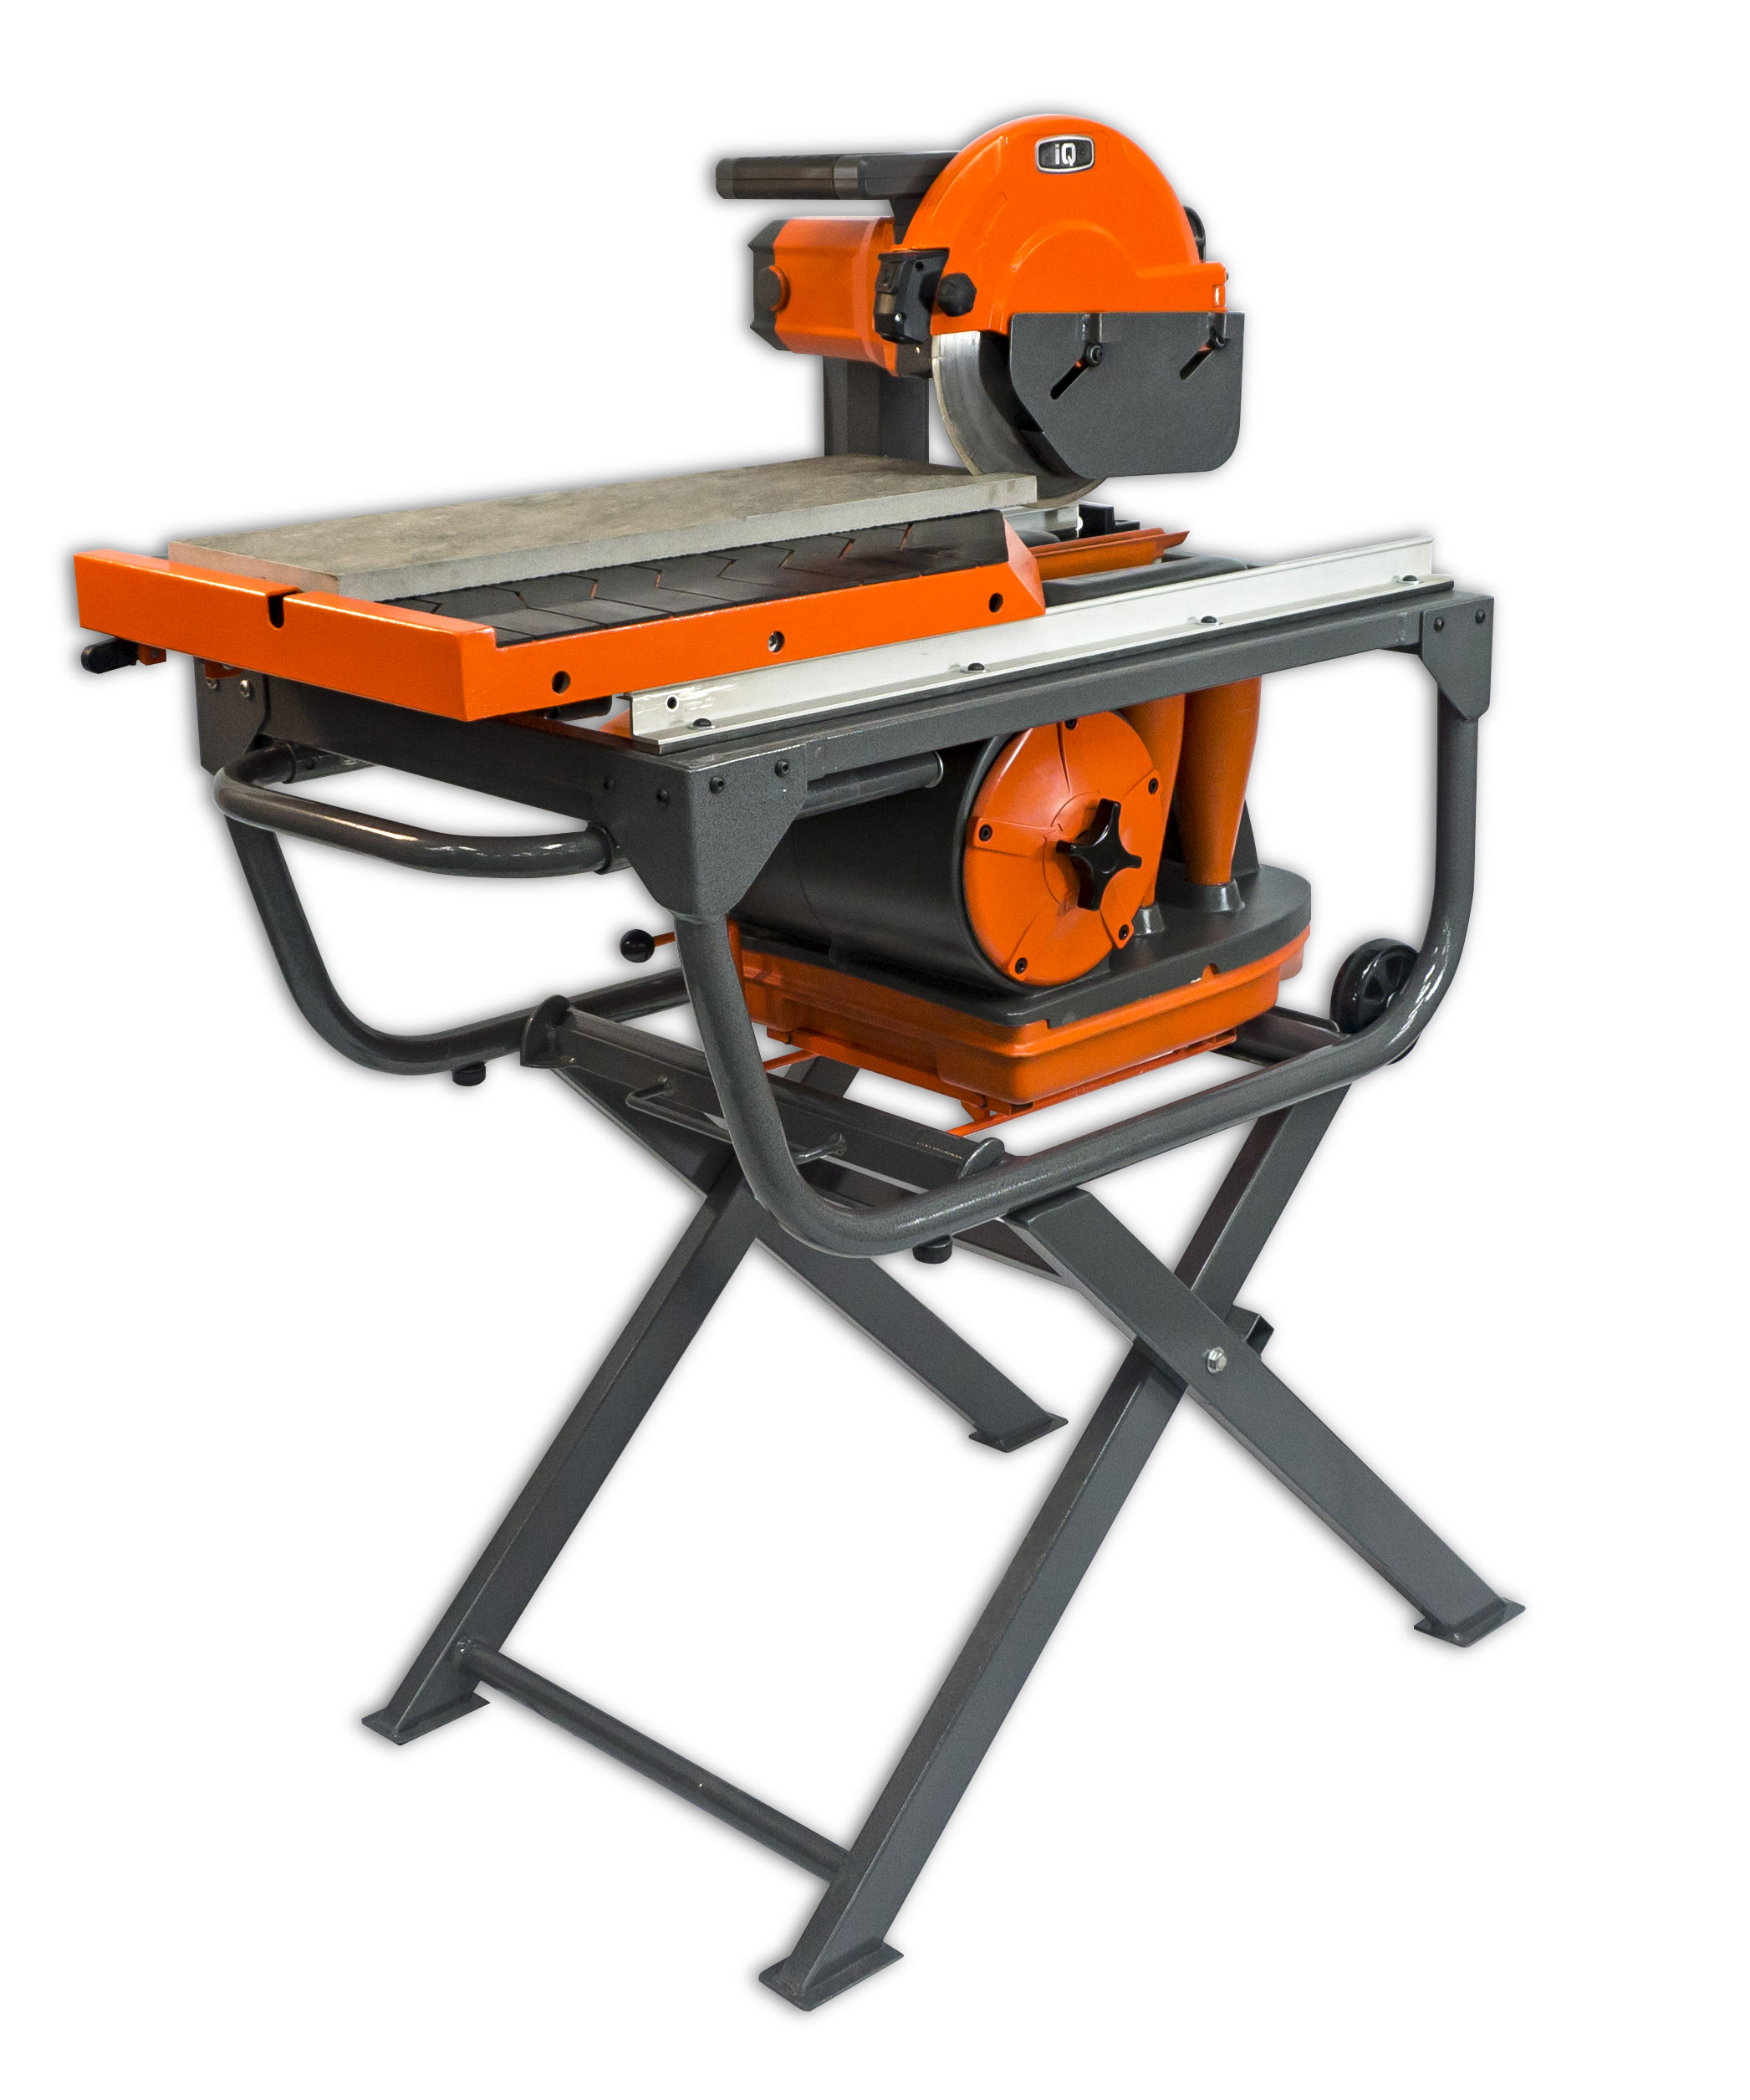 IQ POWER TOOLS INTRODUCES FIRST DRY-CUT TILE SAW: THE IQTS244 - TileLetter